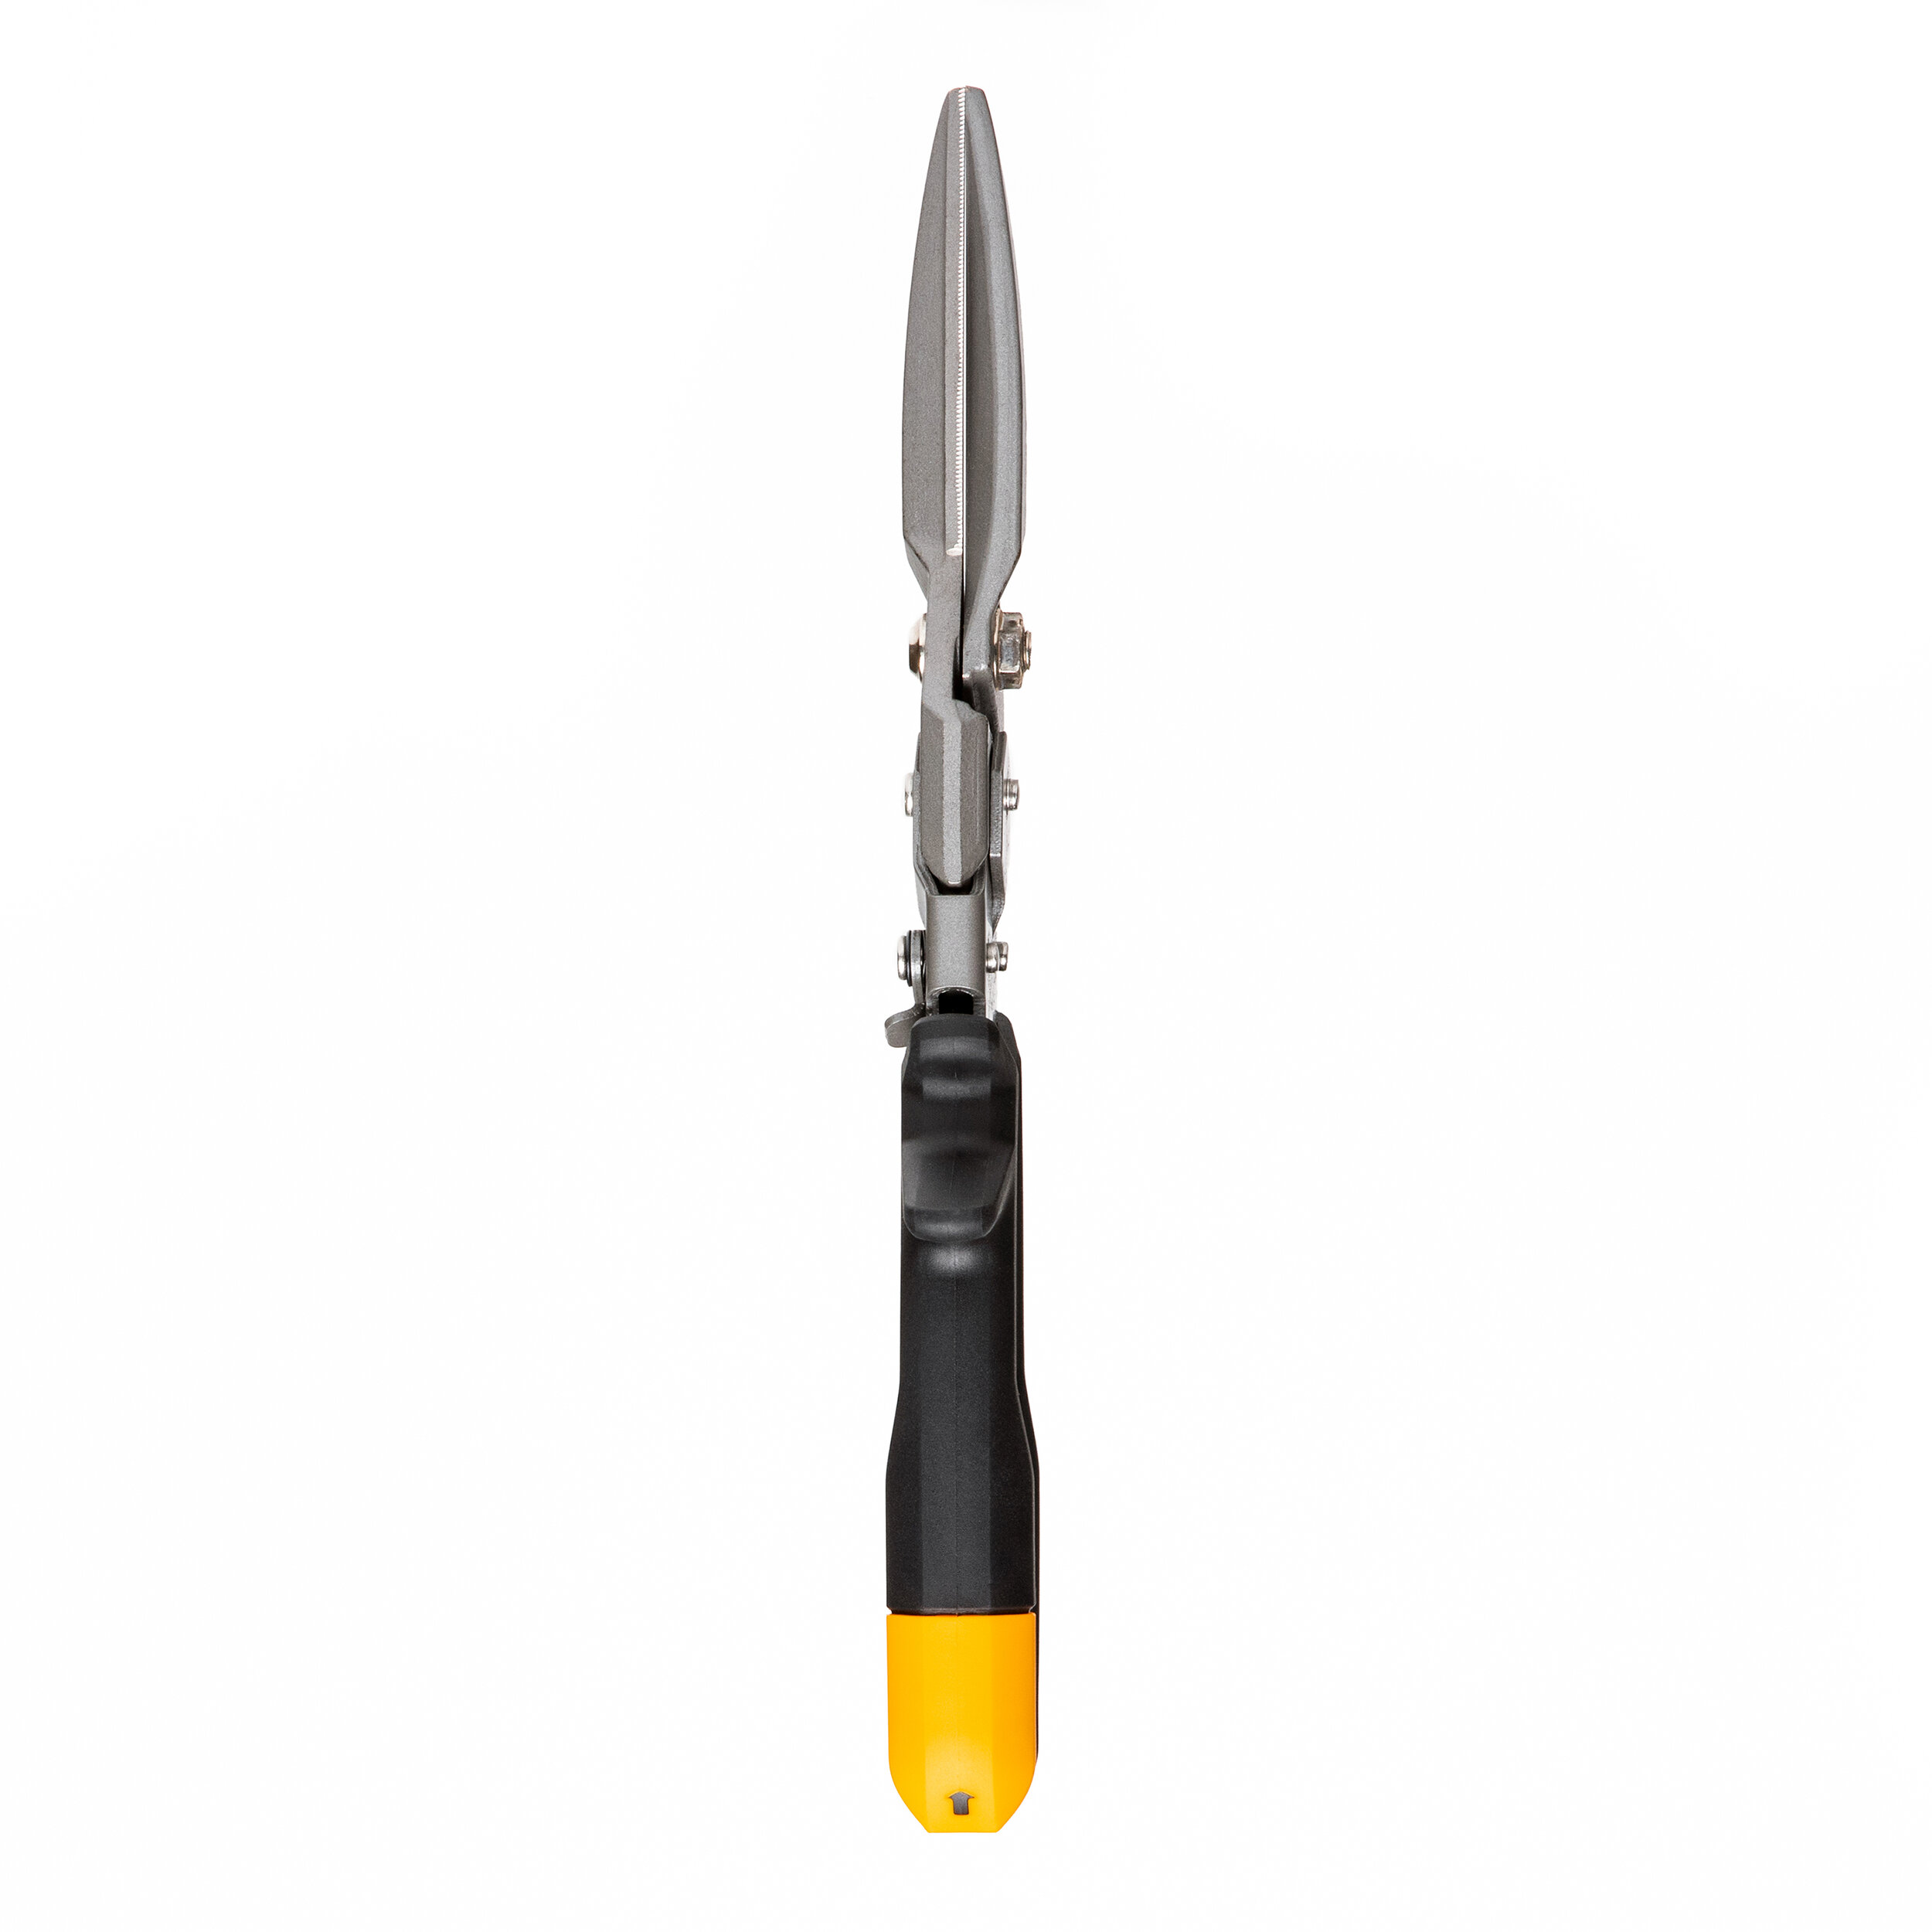 Straight Long Cut Aviation Snips are designed to create effortless long straight cuts.